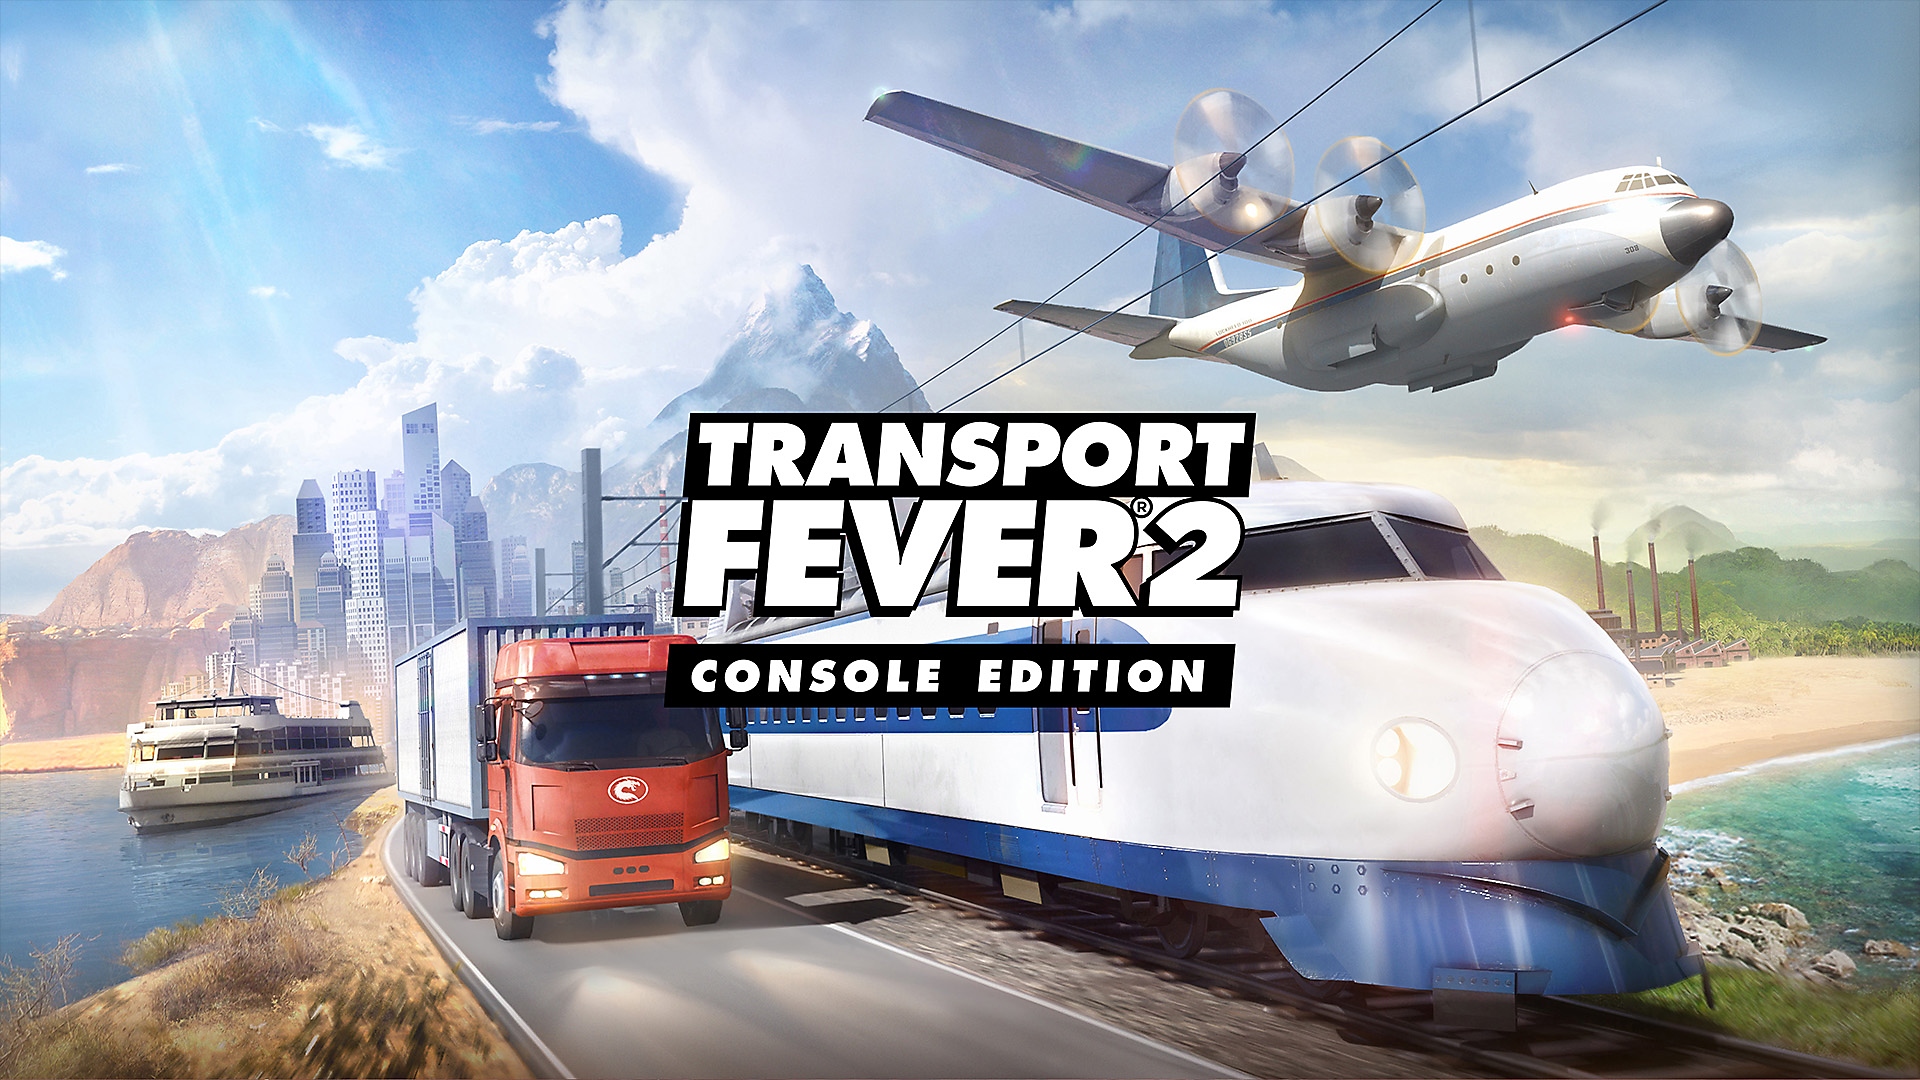 Transport Fever 2: Console Edition - Gameplay Reveal Trailer | PS5 & PS4 Games